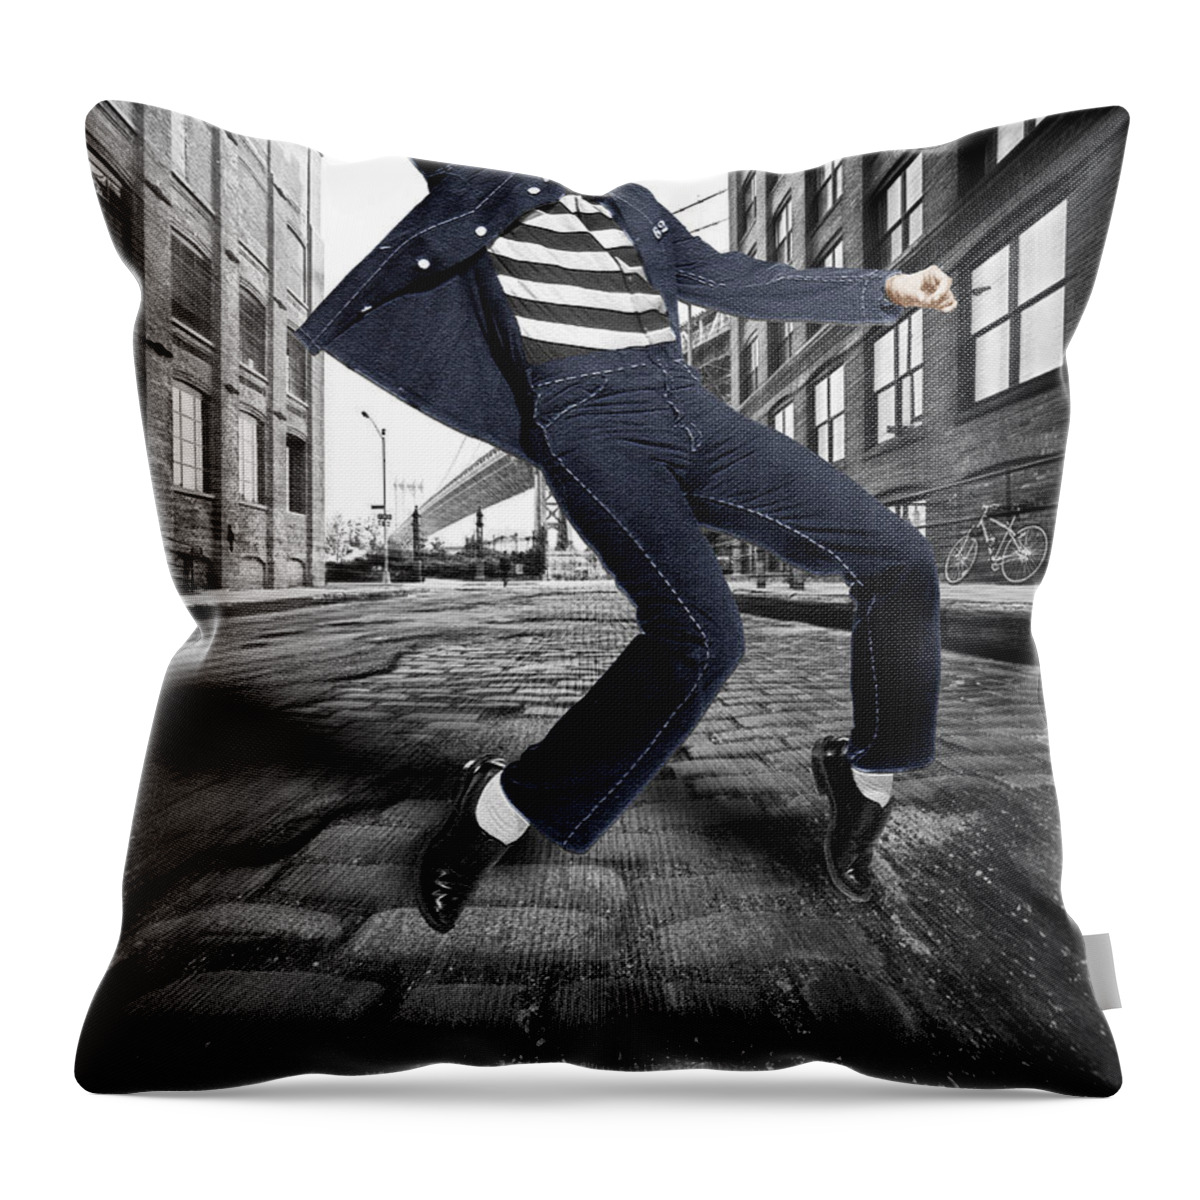 Elvis Presley Throw Pillow featuring the photograph Elvis Presley In New York City Street by Tony Rubino